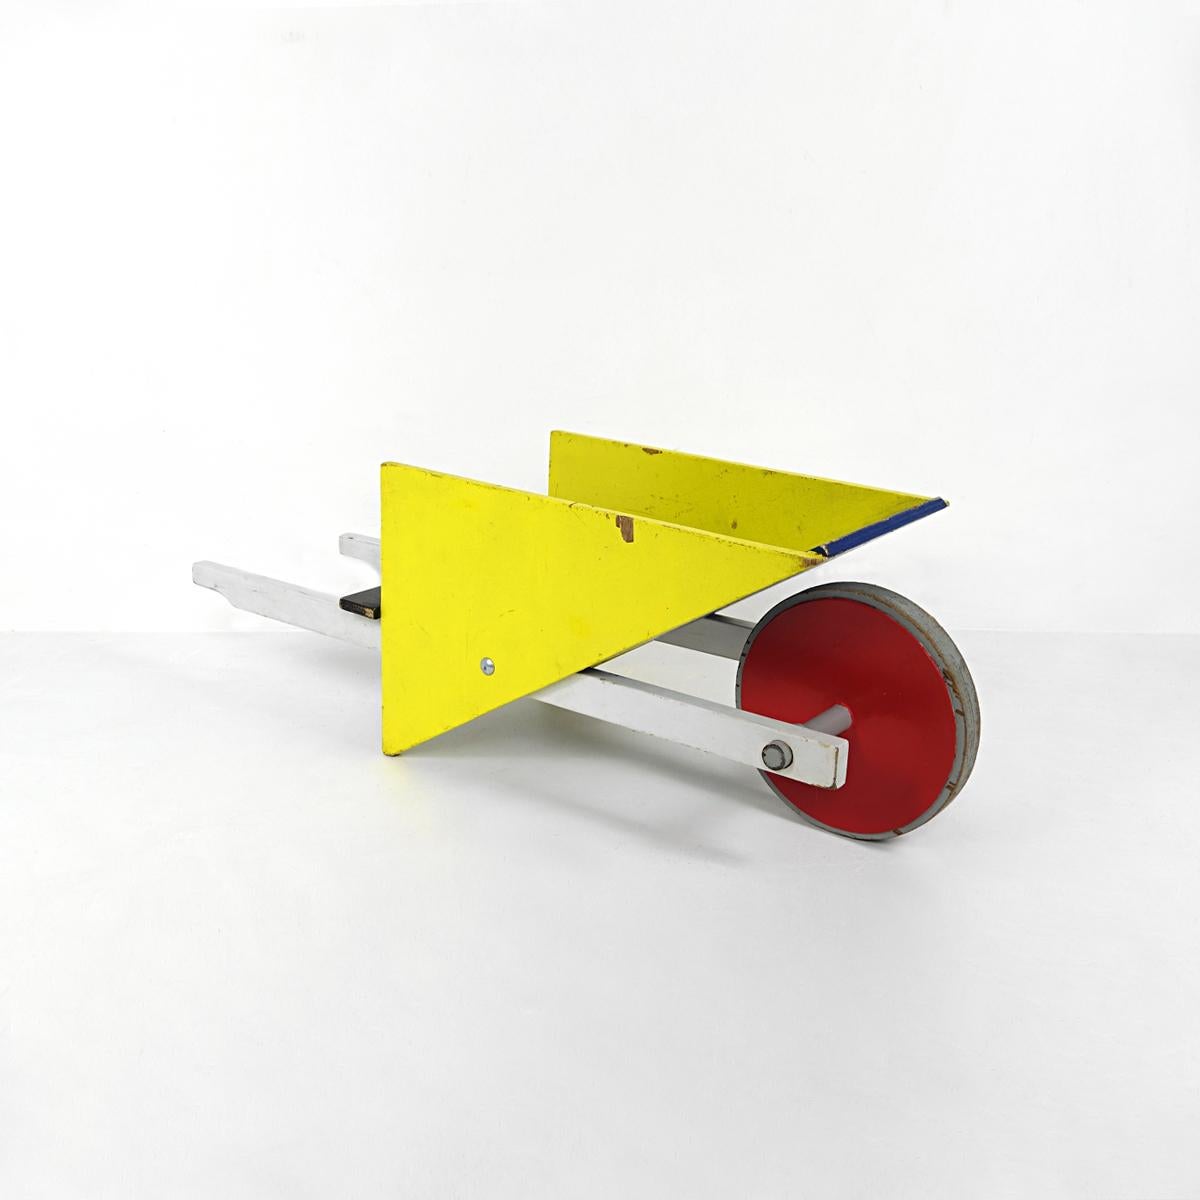 Colorful and cheerful children's wheelbarrow in the primary colors that are so typical of Rietveld's work: red, yellow, blue, black and white.

This piece is still in its original condition and has not been renovated. It was constructed solidly and